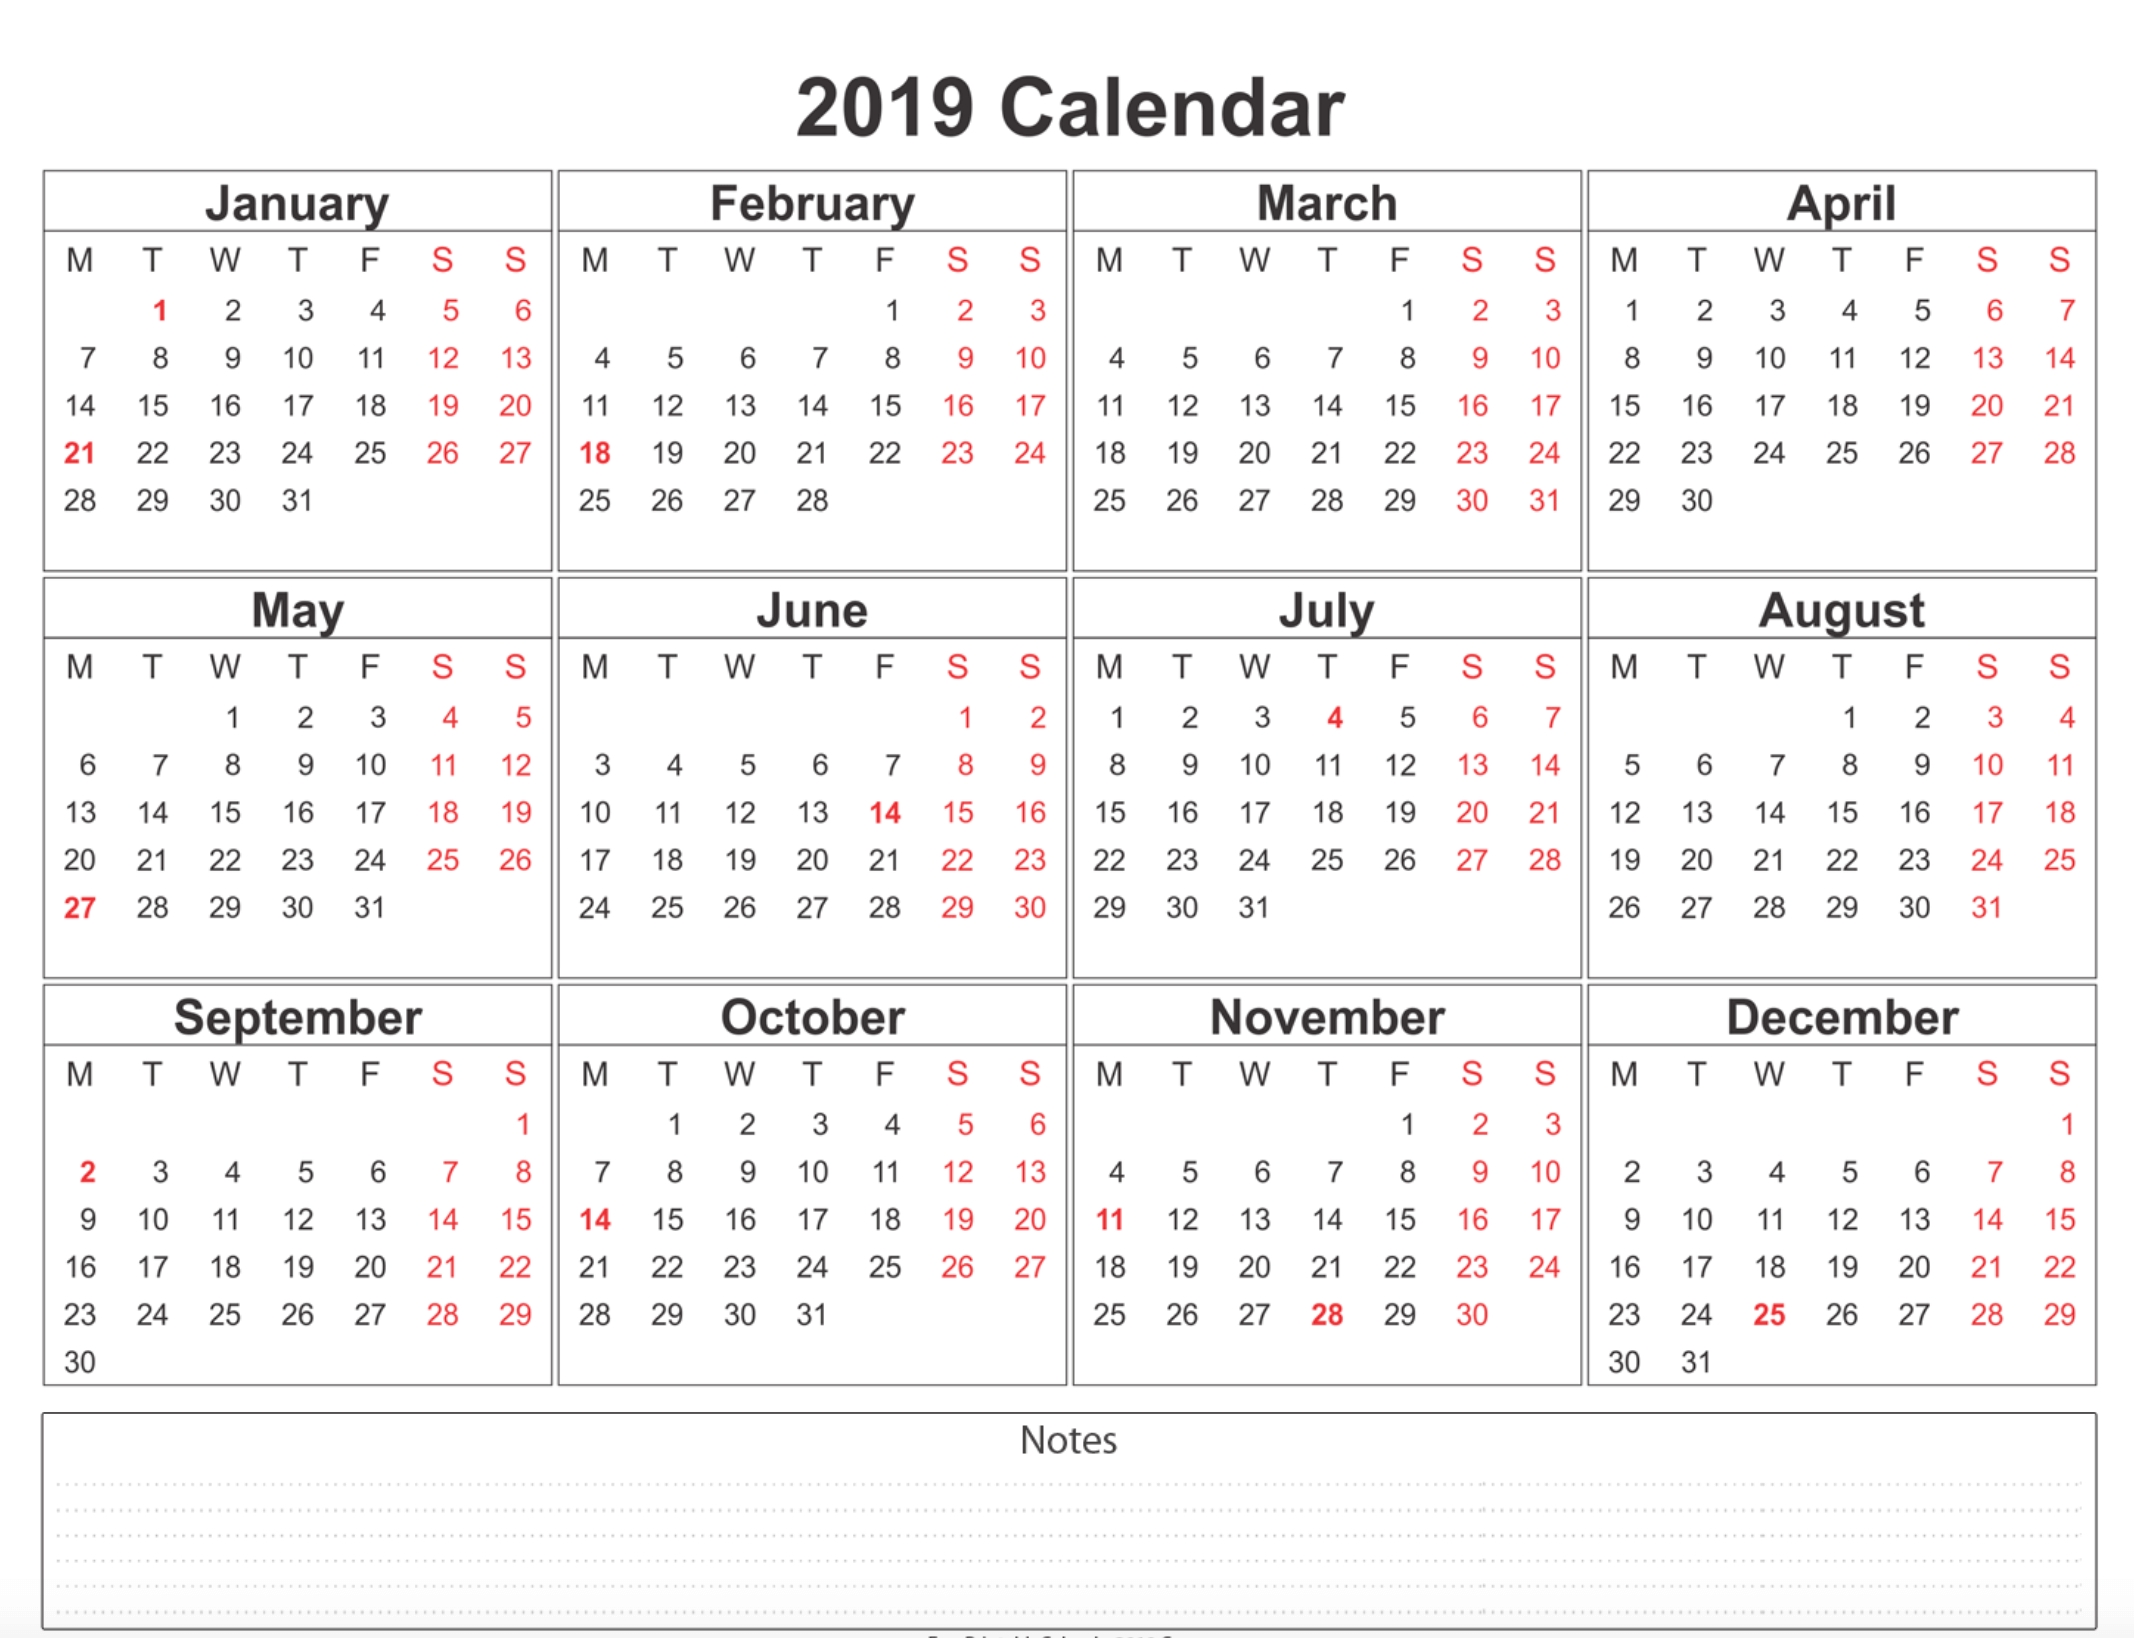 Free Printable Calendar 2019 With Holidays | Blank 12 Month Calendar regarding Free Printable Calendar Numbers For School Year